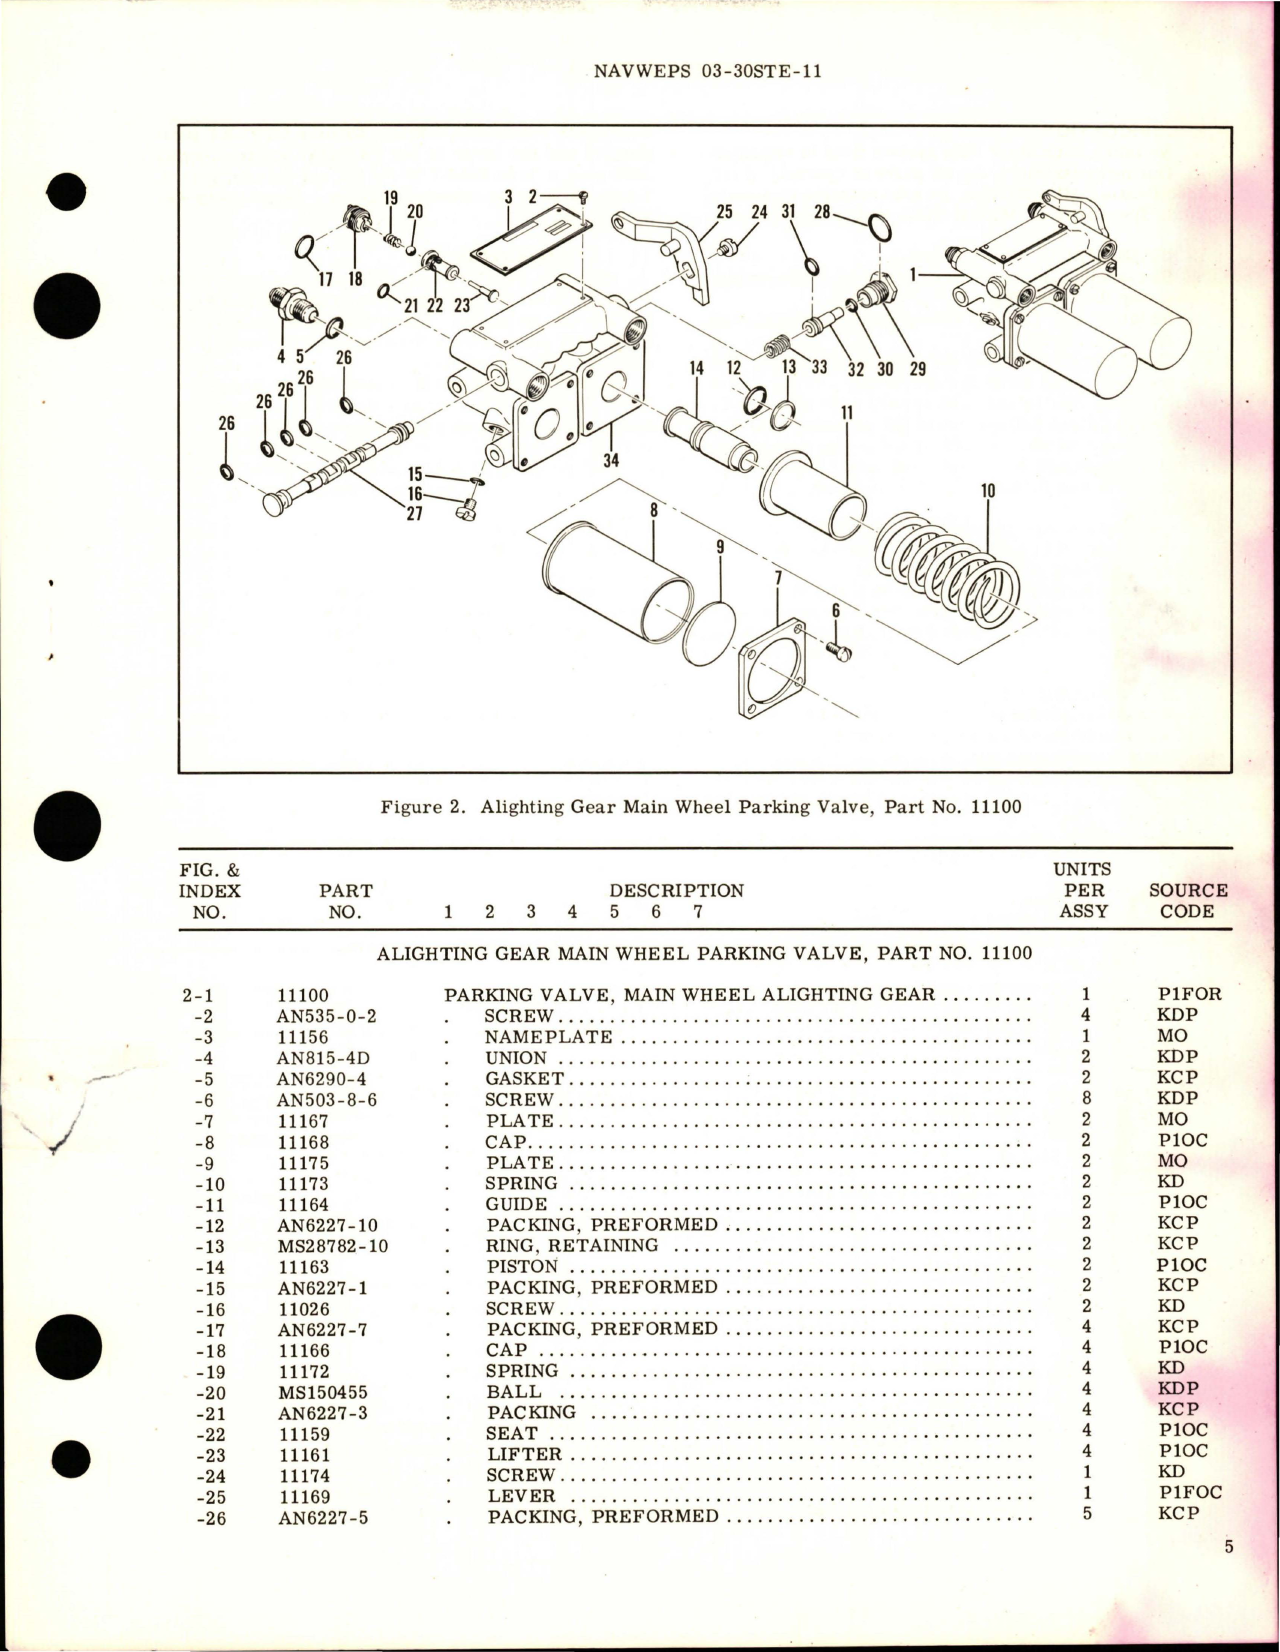 Sample page 5 from AirCorps Library document: Overhaul Instructions with Parts for Alighting Gear Main Wheel Parking Valve - Part 11100 